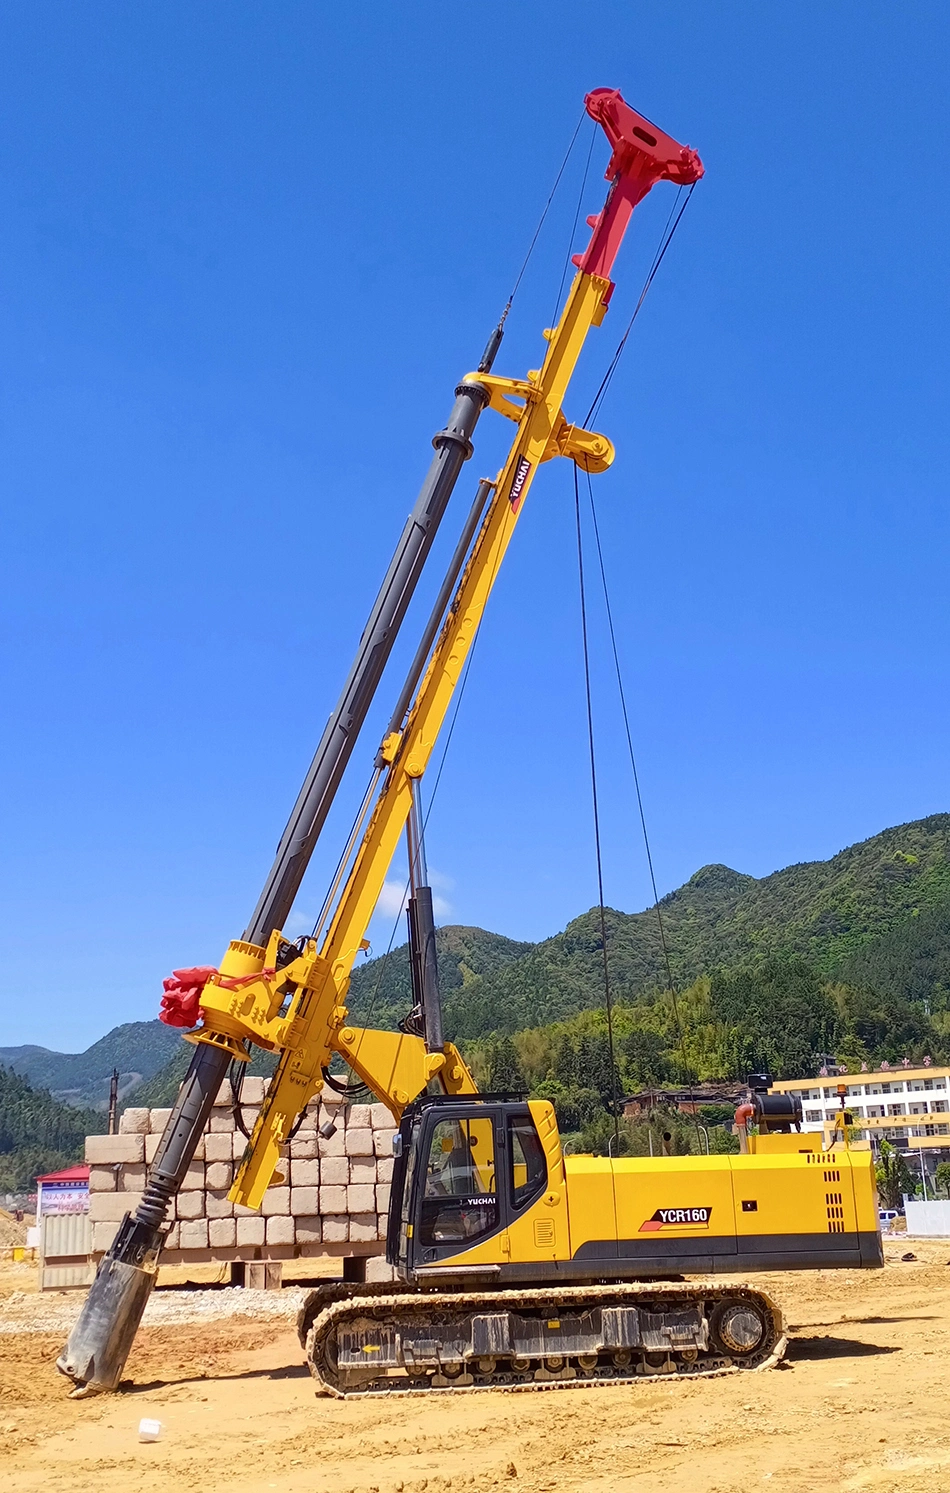 Pilling Machine Ycr160d Rotary Drilling Rigs for Construction